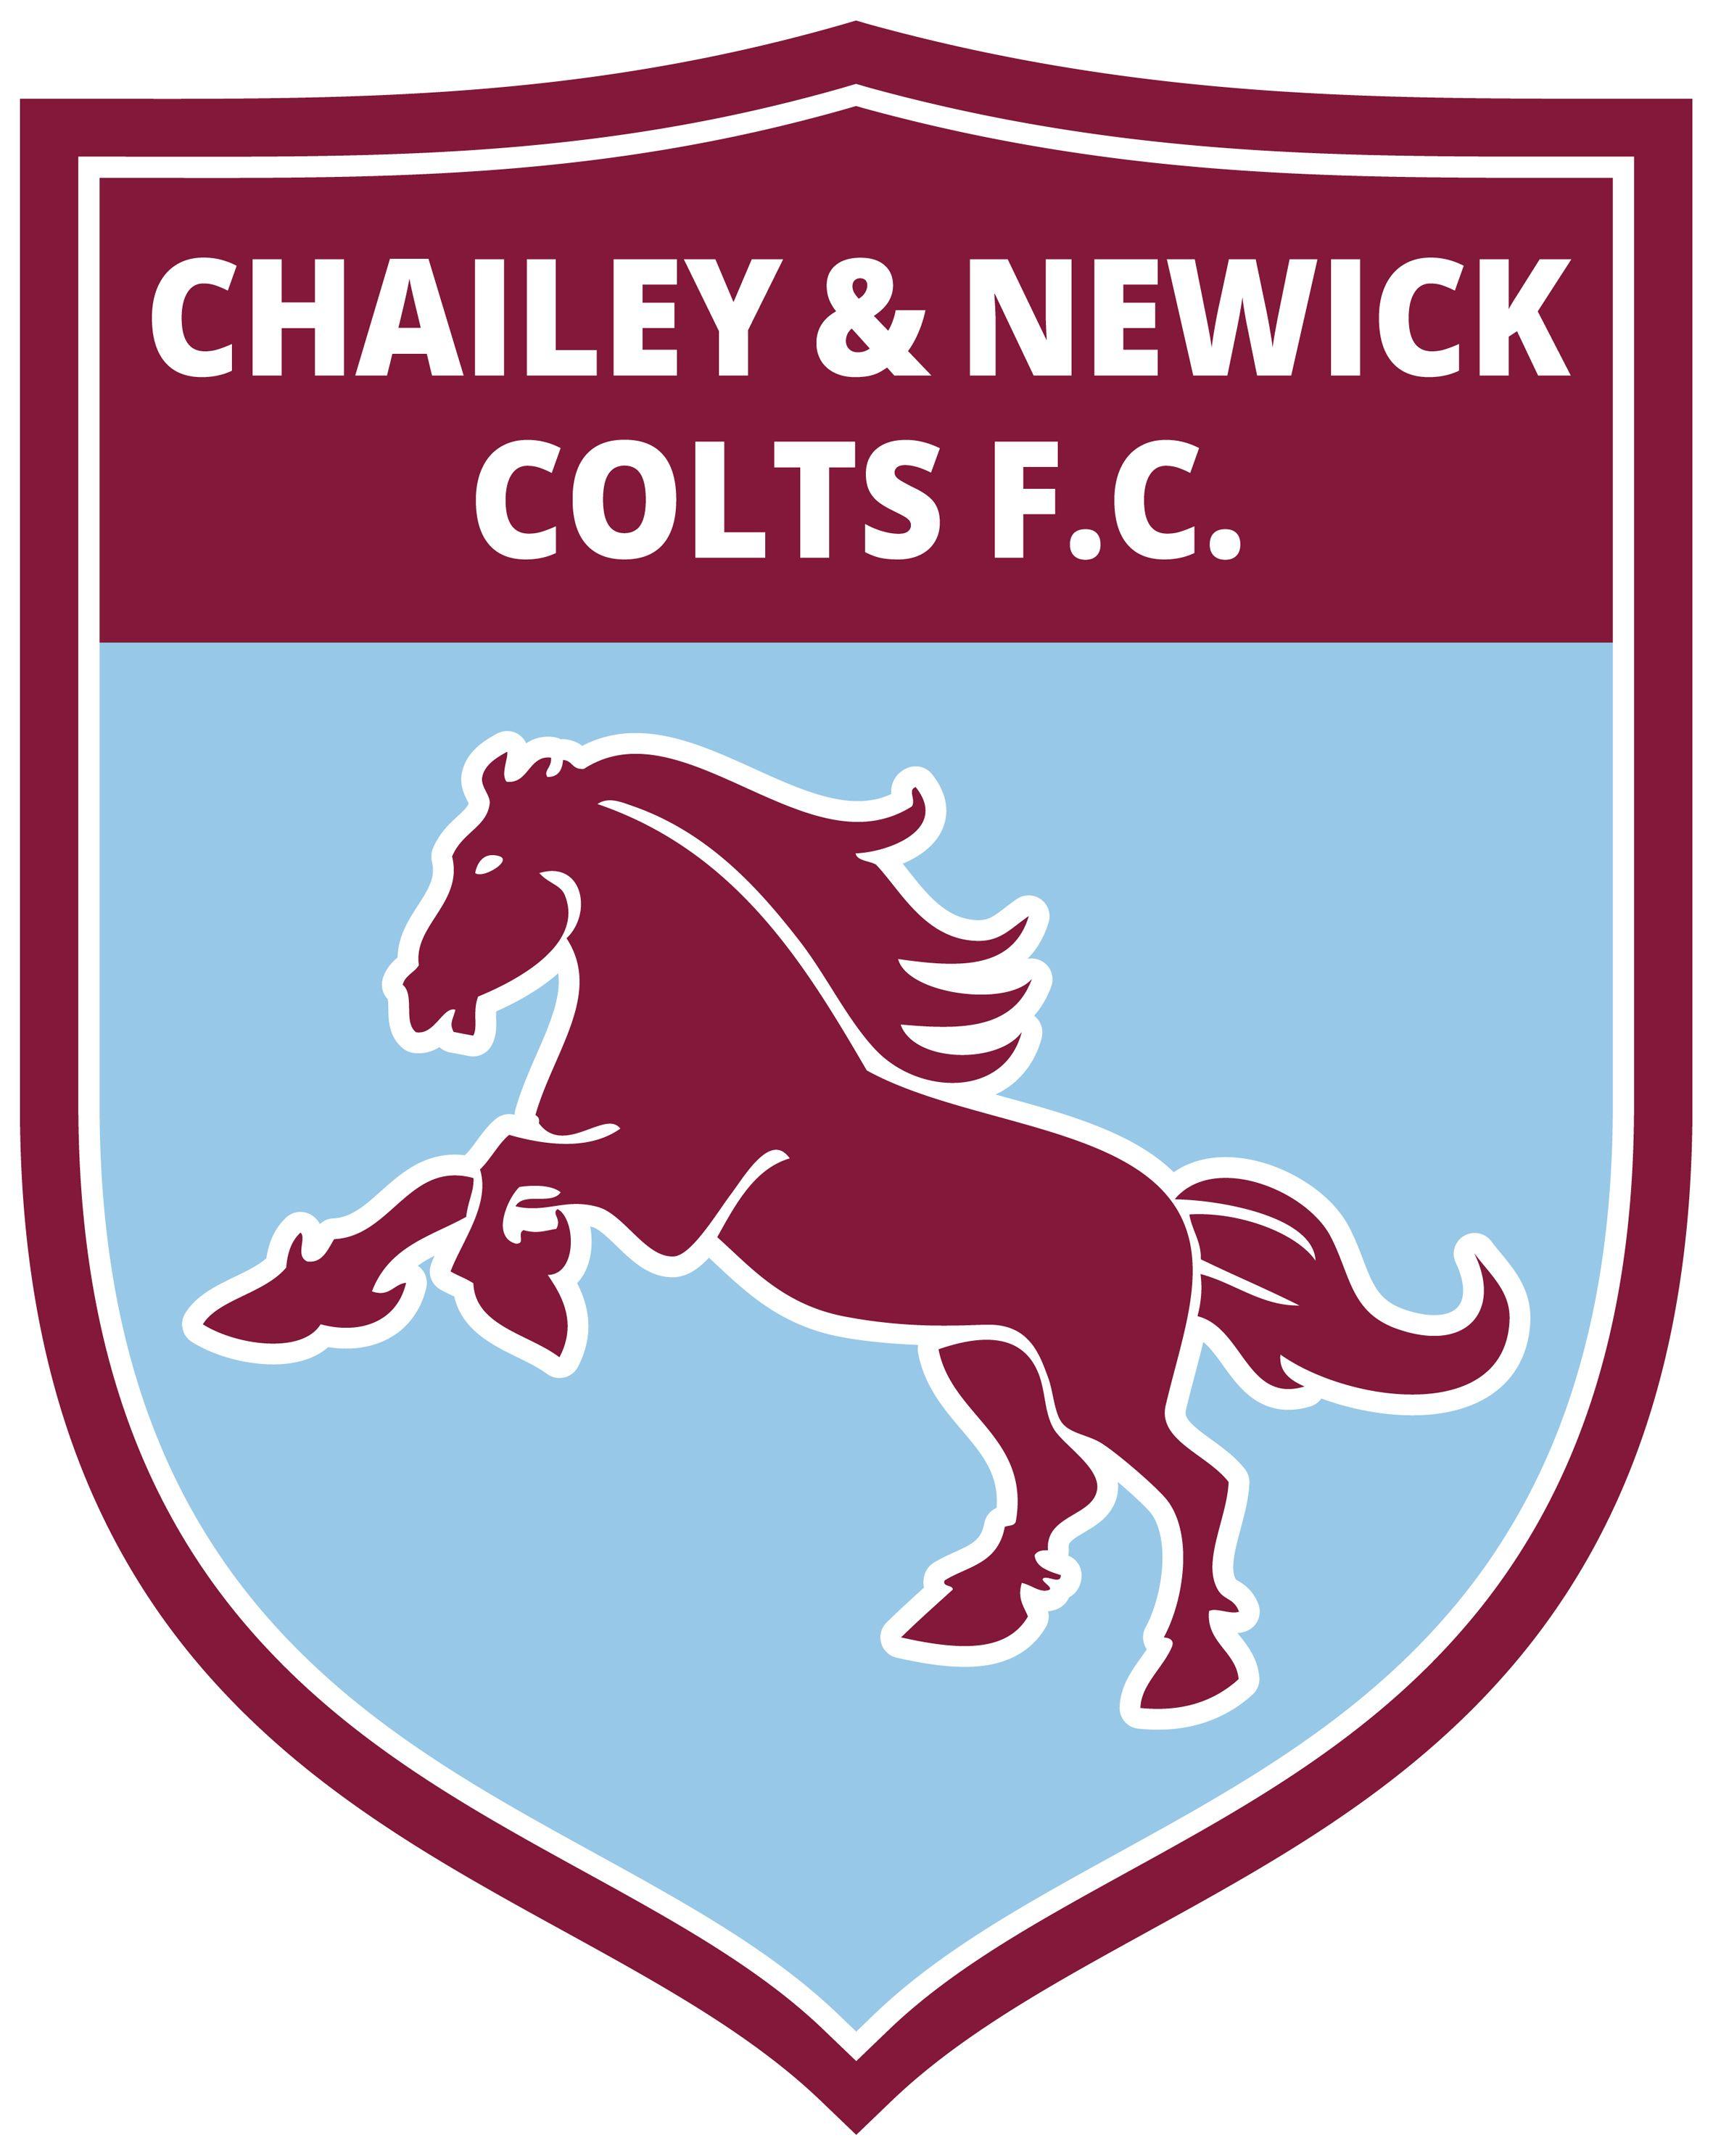 Horse Football Logo - Chailey and Newick Colts Football Club of Conduct